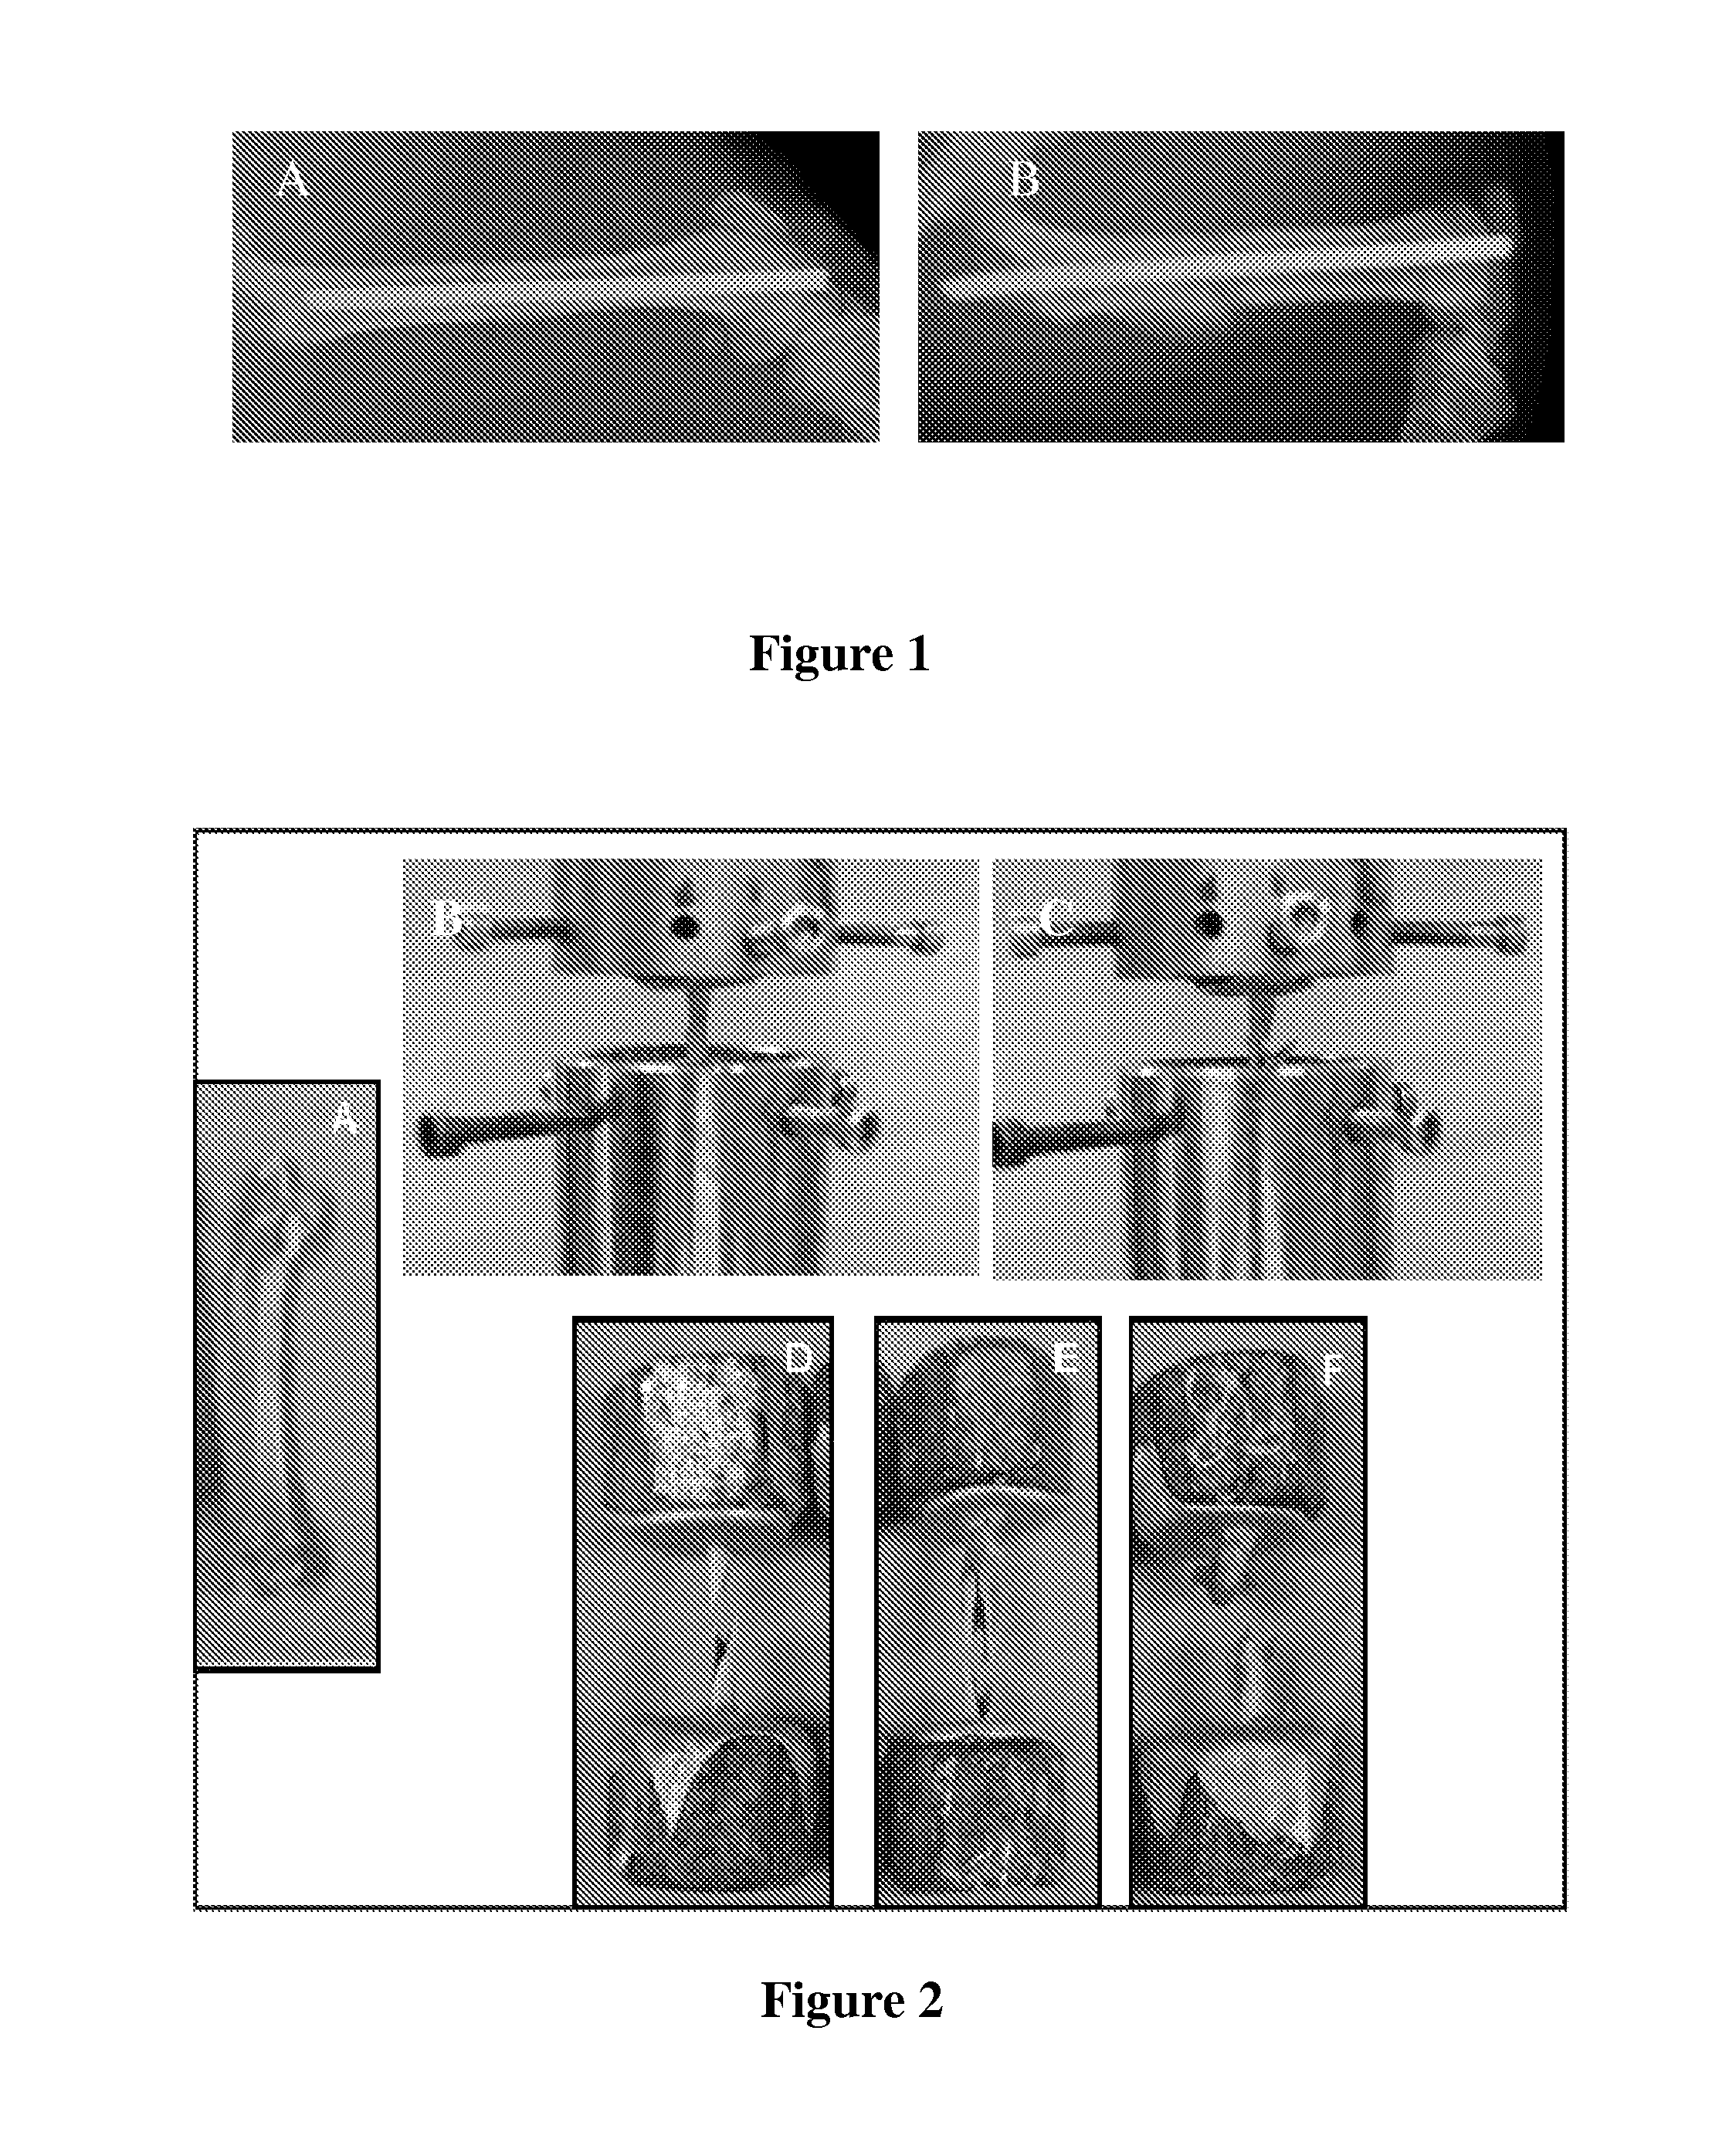 Implantable devices coated with insulin-mimetic agent composites and methods thereof